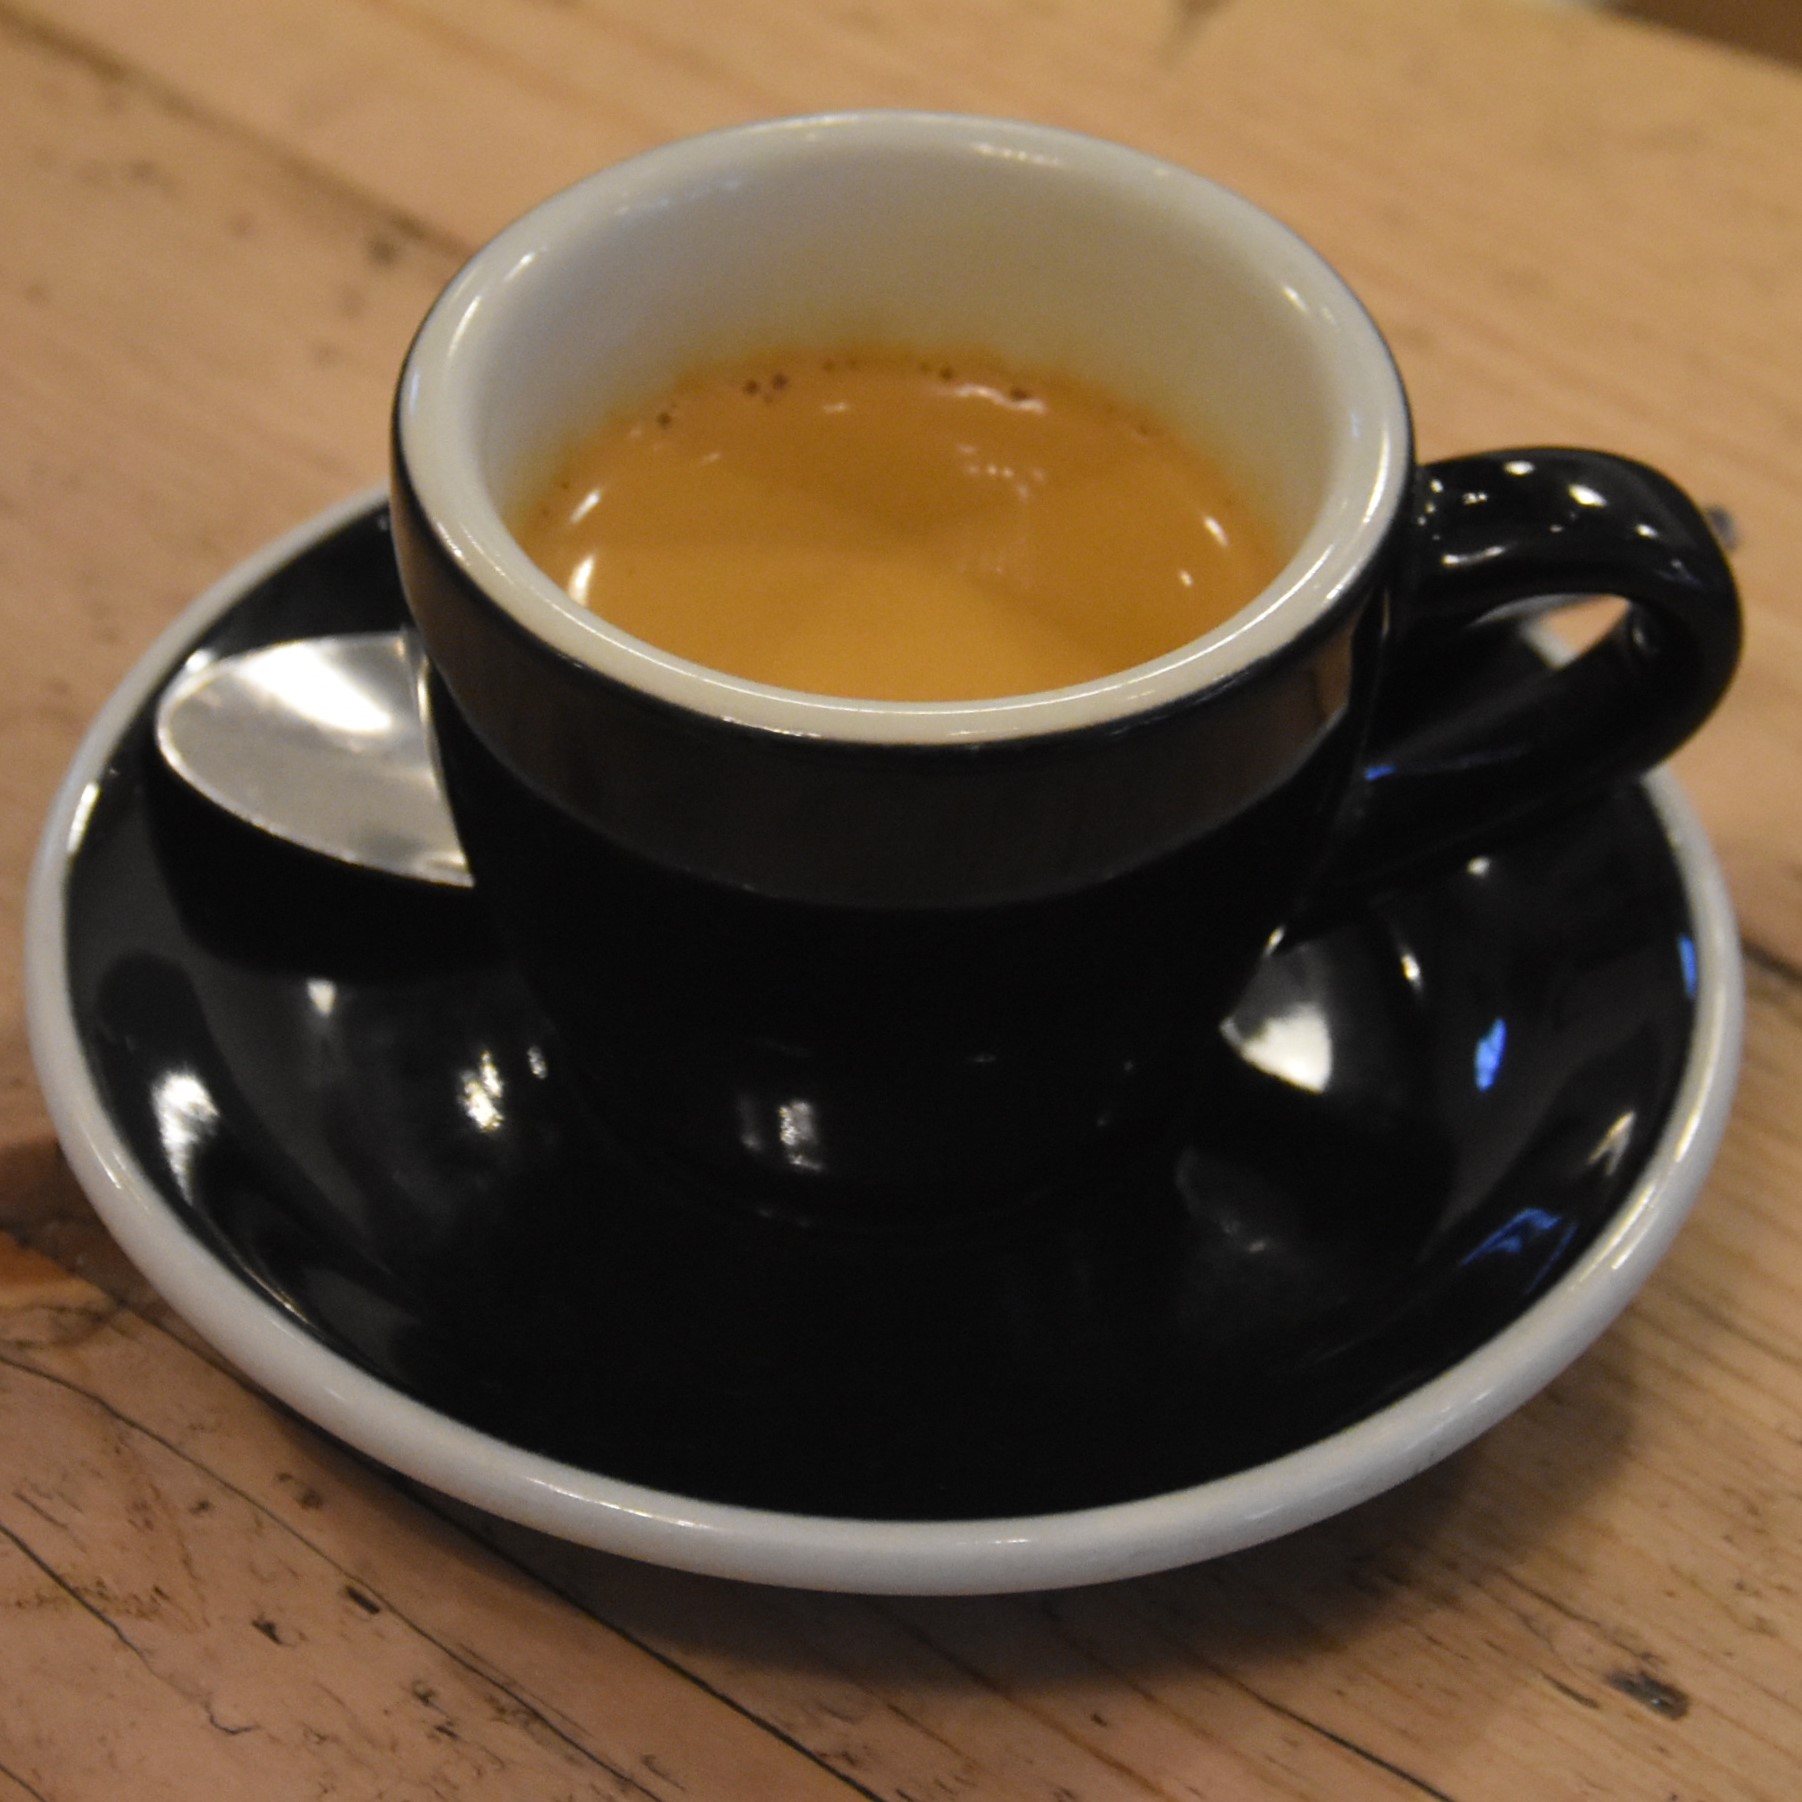 My espresso, served in a classic black cup, at Attendant Clerkenwell, made with the Brazilian Esmeralda house espresso.